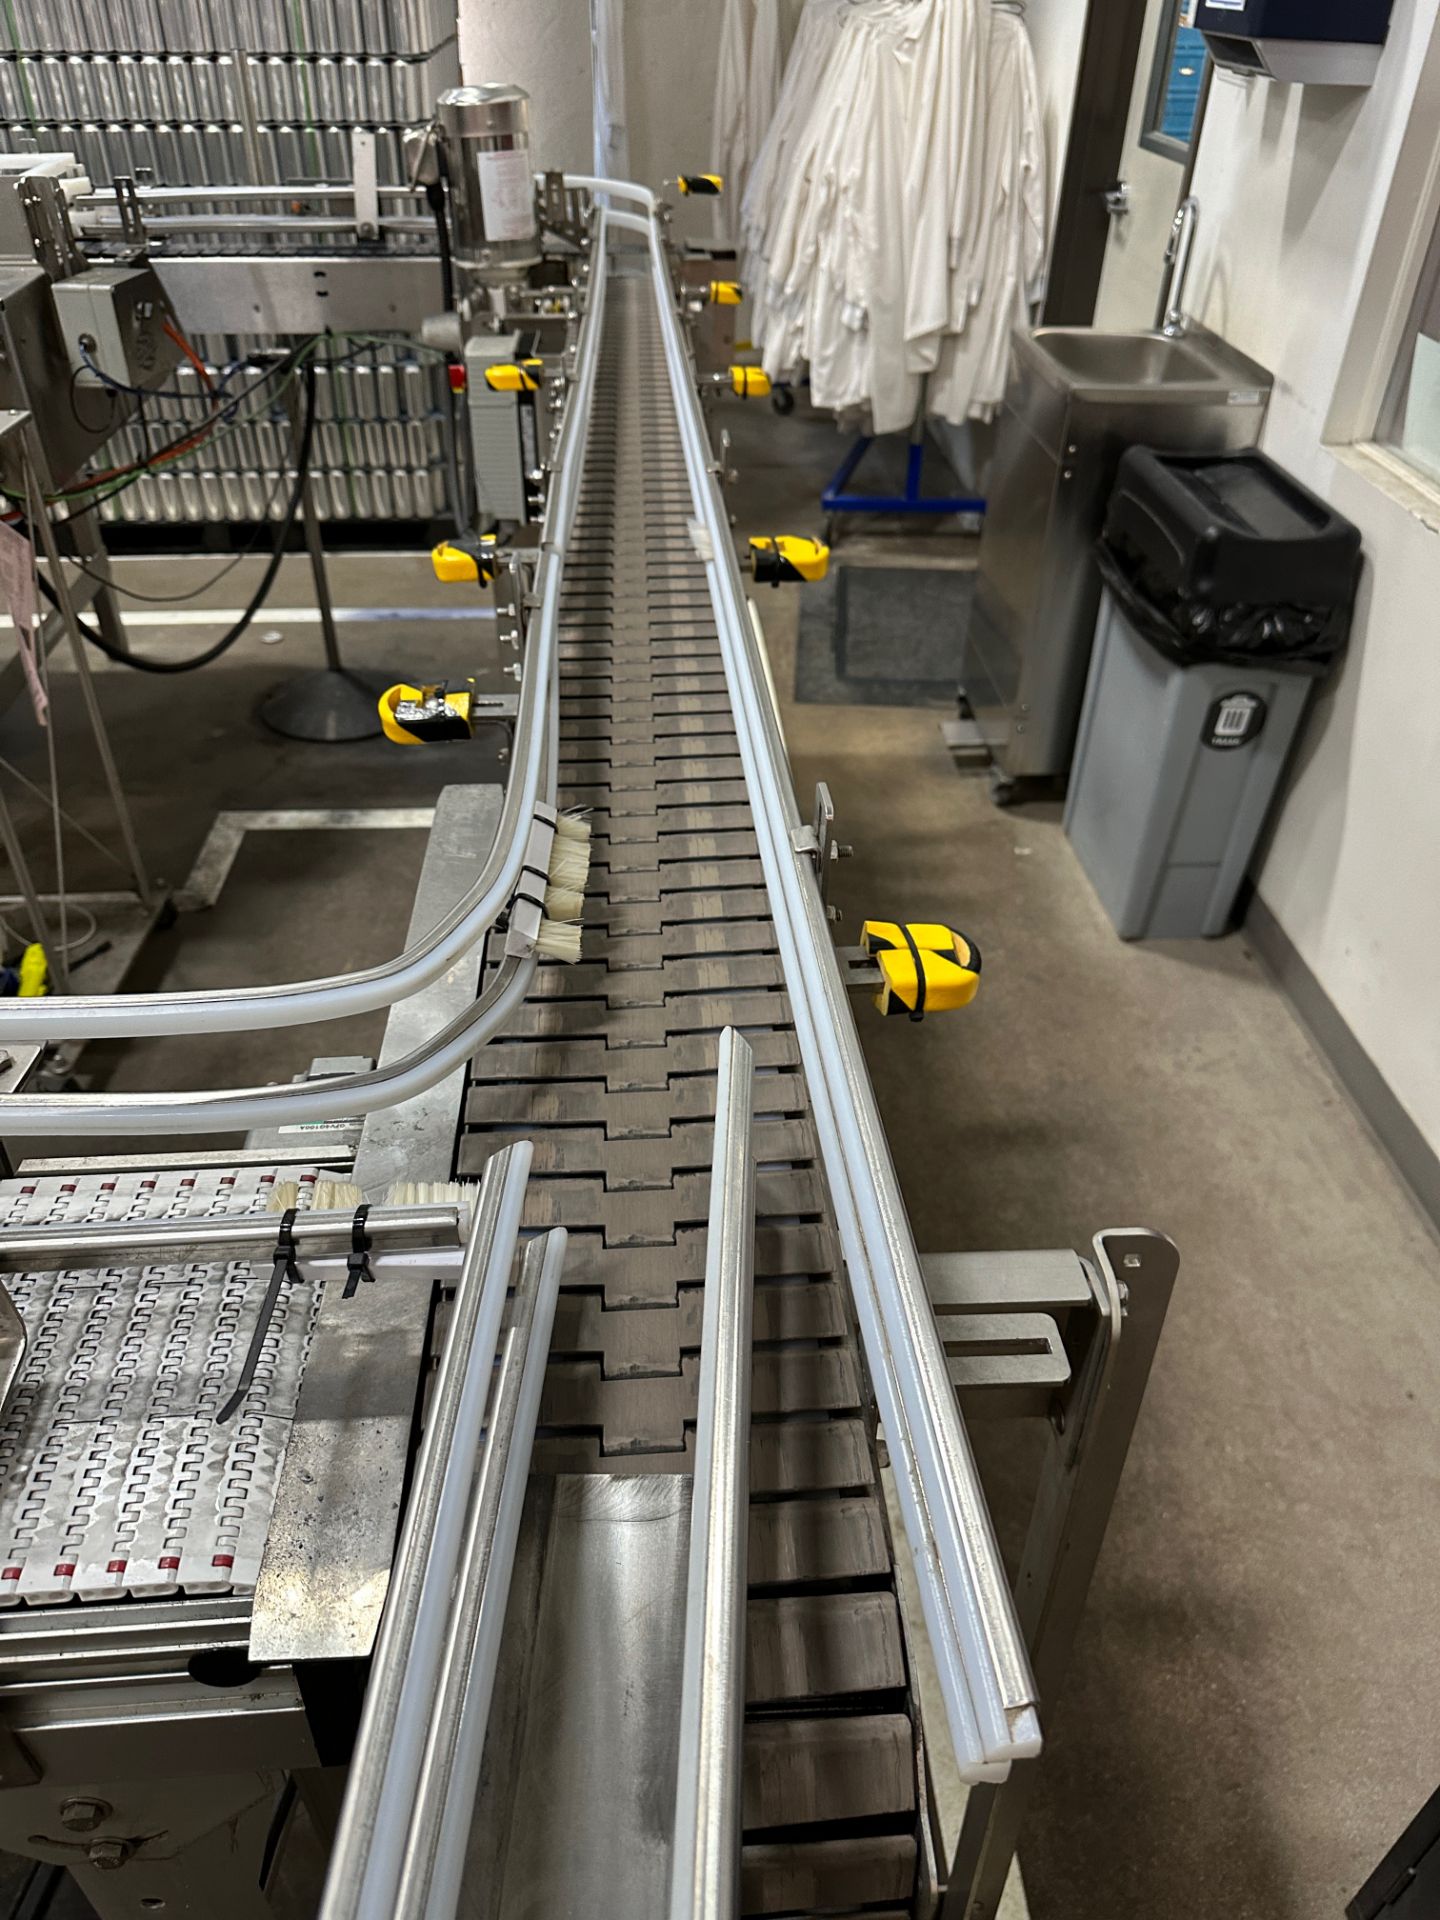 MCE Conveyor from Labelers to Accumulation Table (Approx. 7.5" x 9') | Rig Fee $150